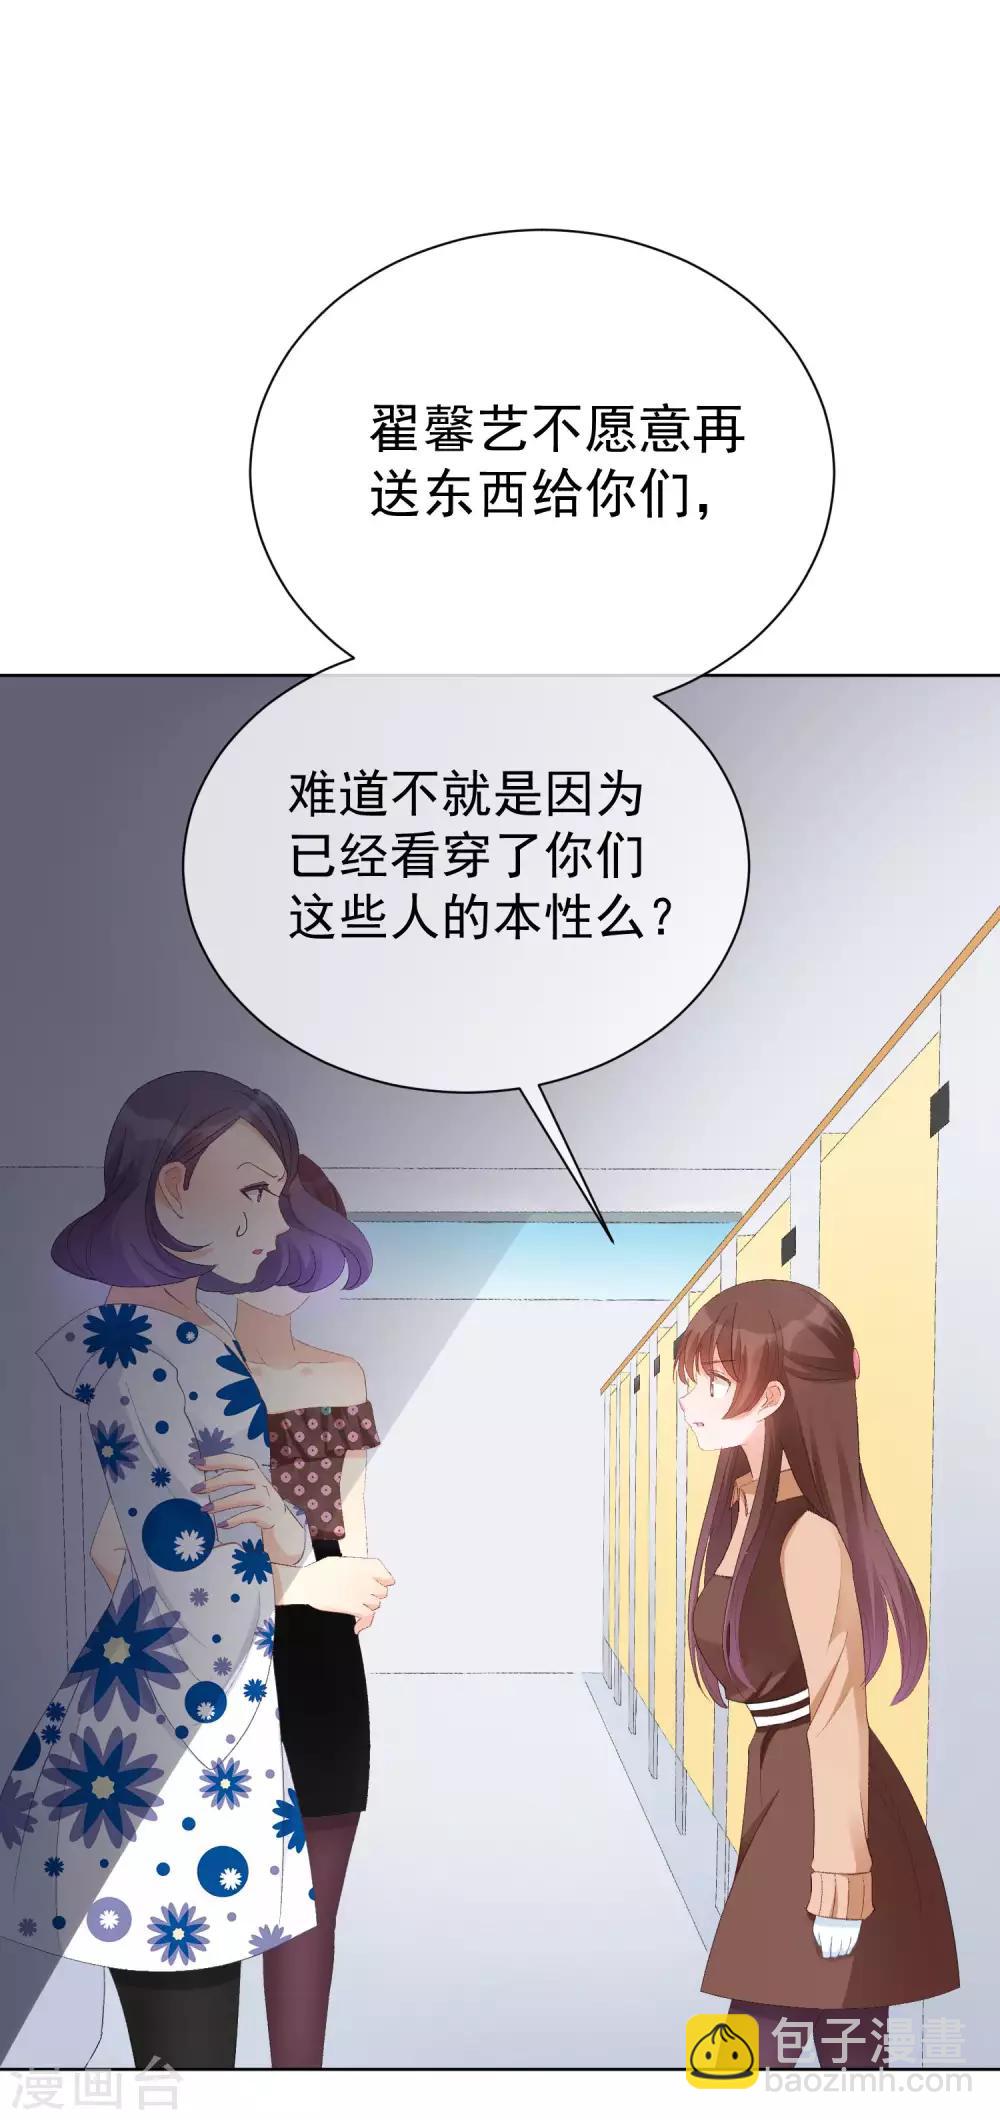 One Kiss A Day - 第36话 真正的她 - 1